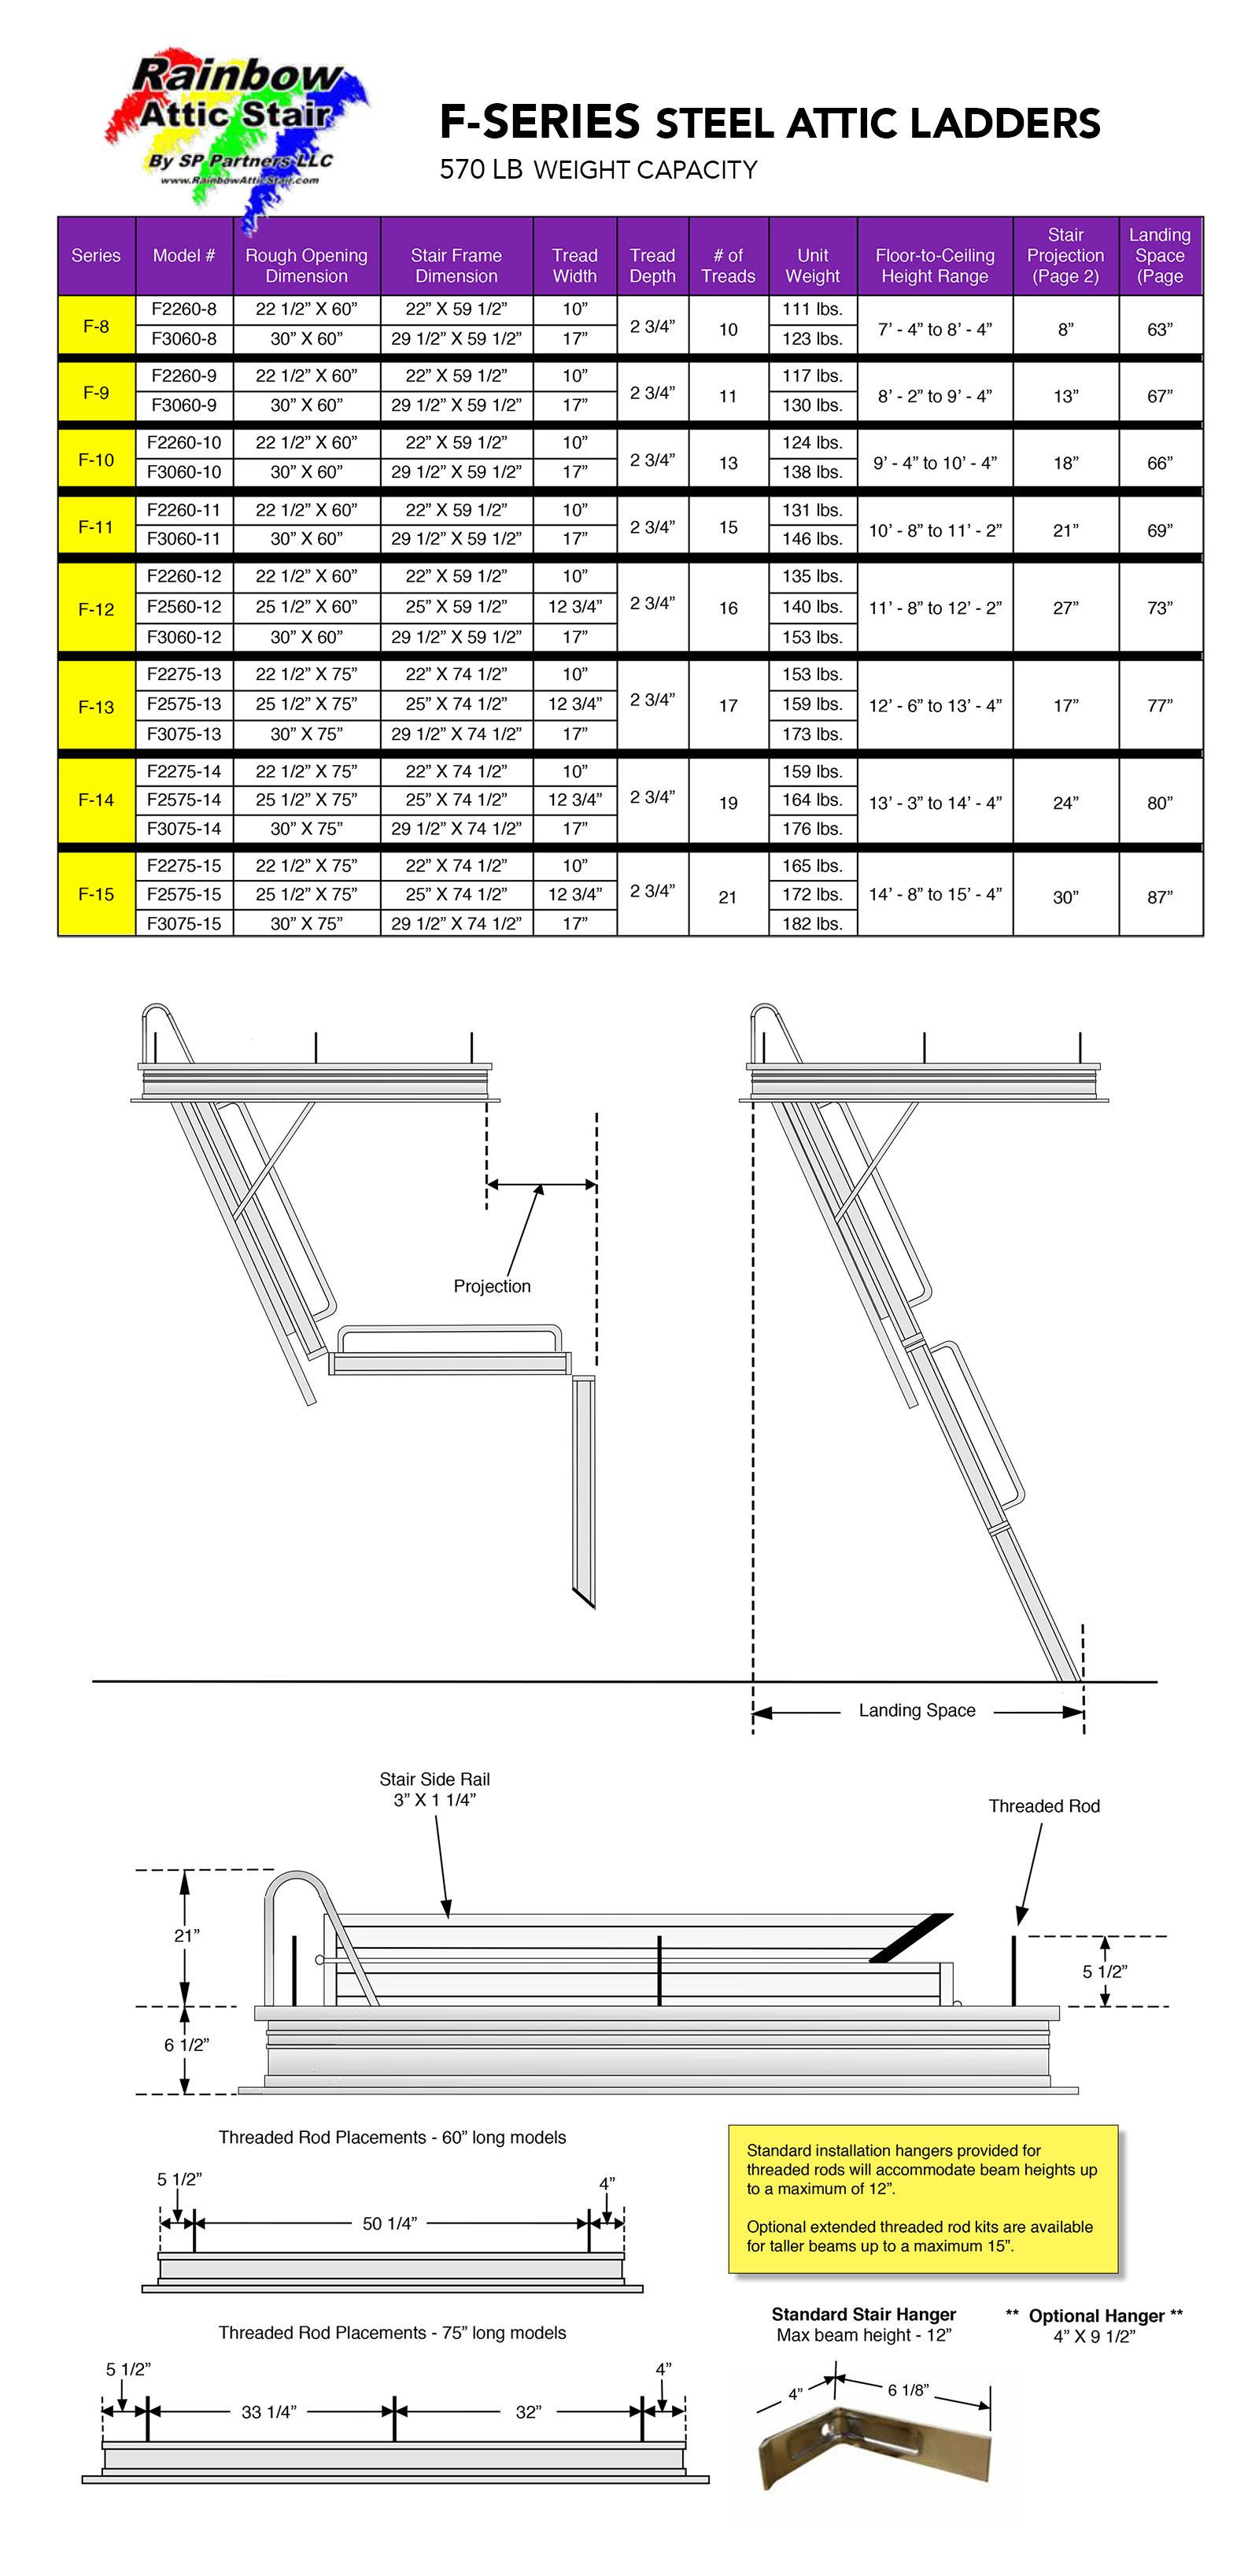 Rainbow Attic Stair F-Series Specifications